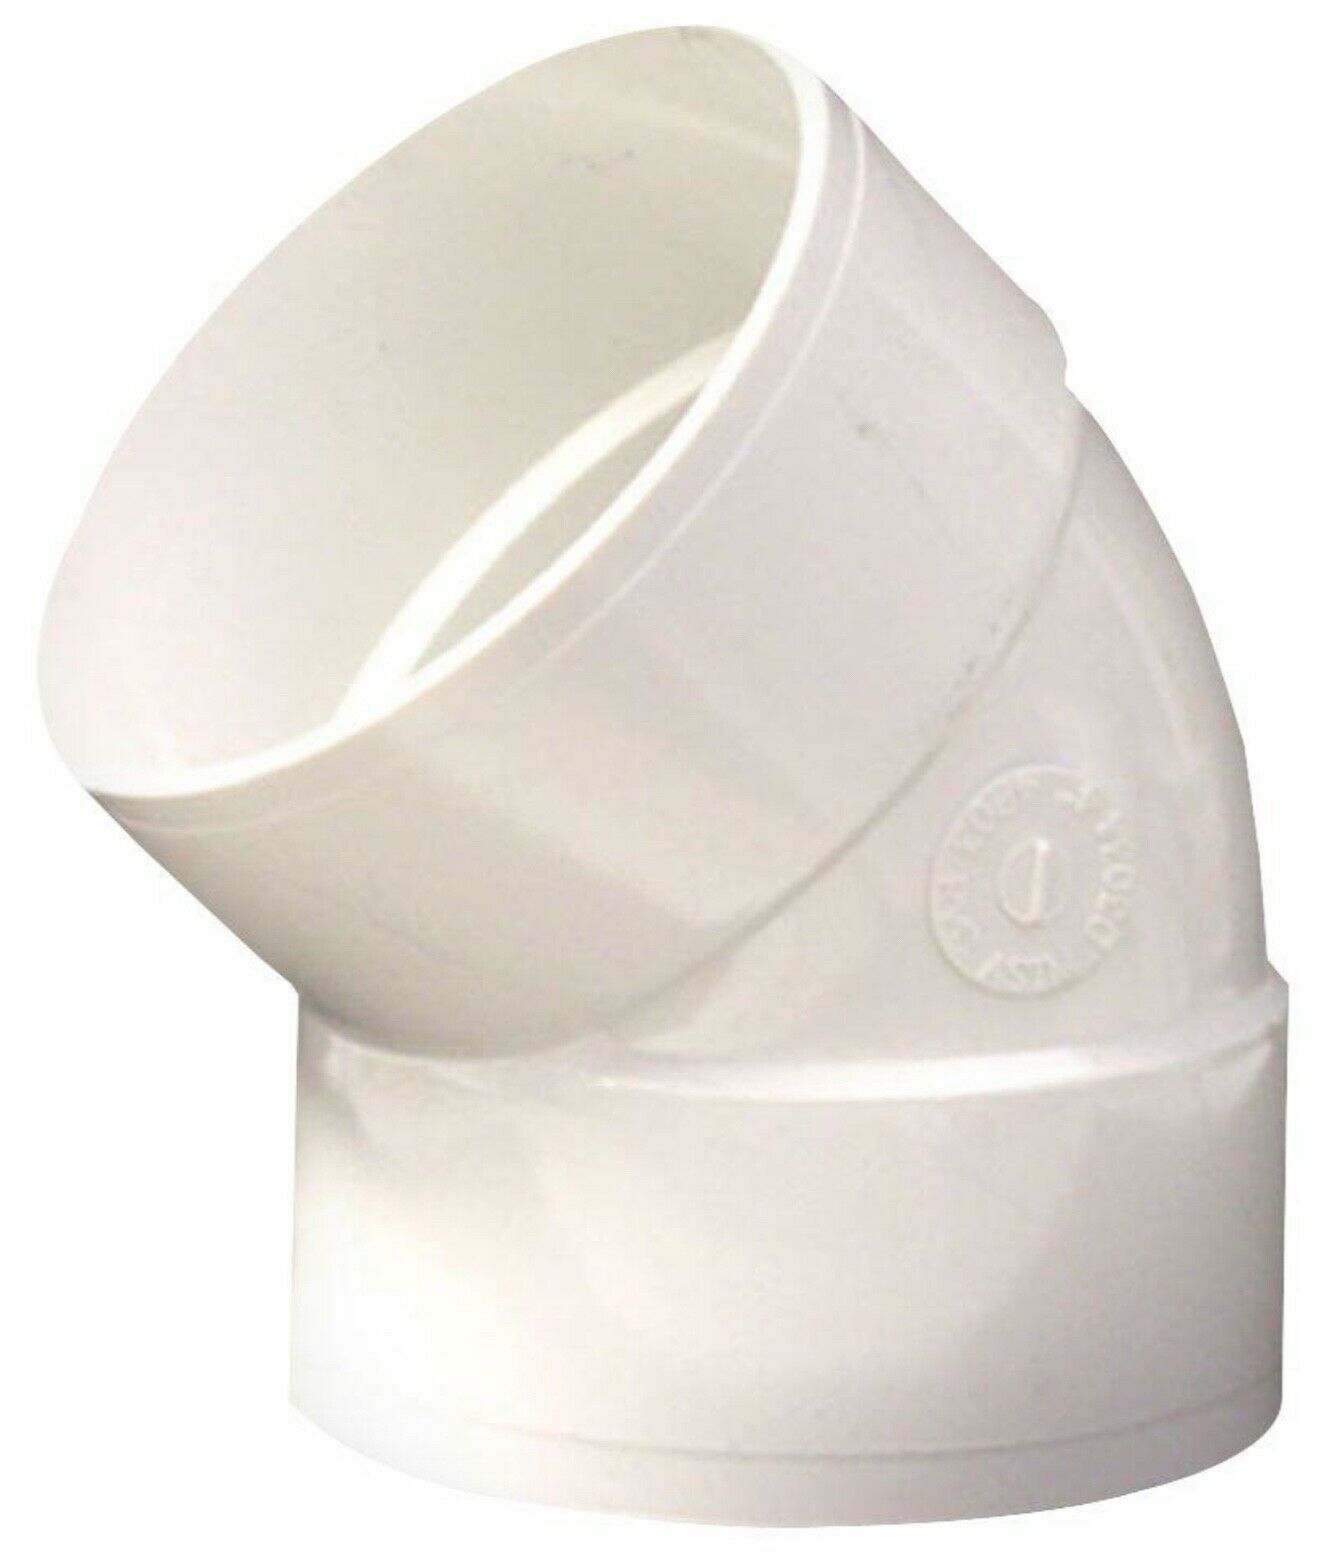 Primary image for NDS 4 in. PVC Sewer and Drain 45° Hub x Hub Elbow. Need Larger Qty? Let Us Know